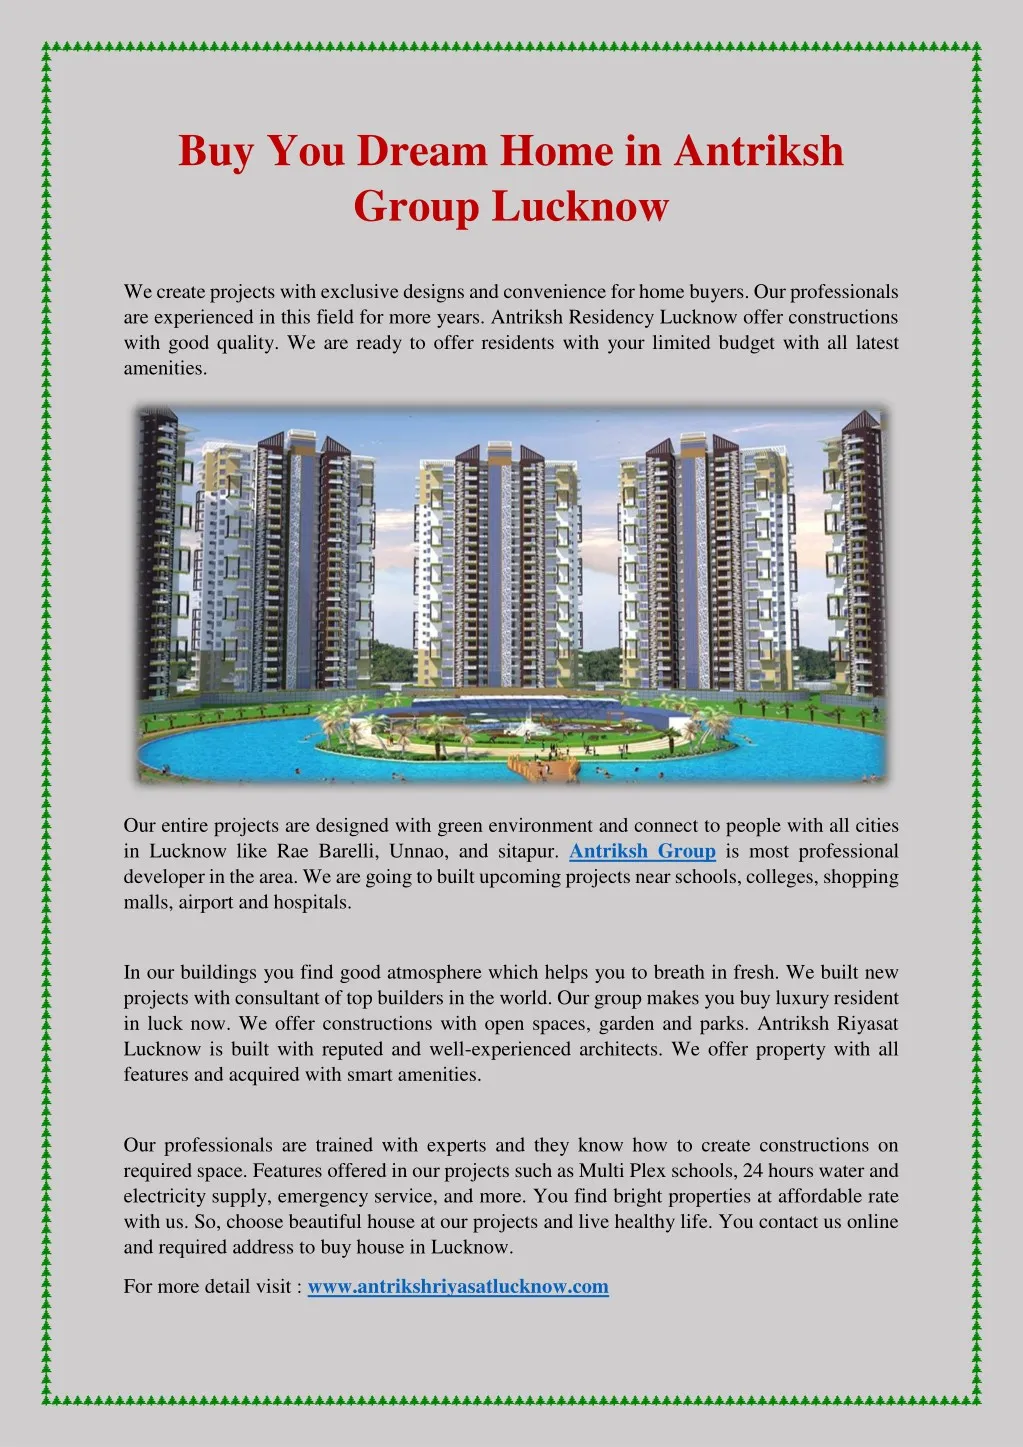 buy you dream home in antriksh group lucknow